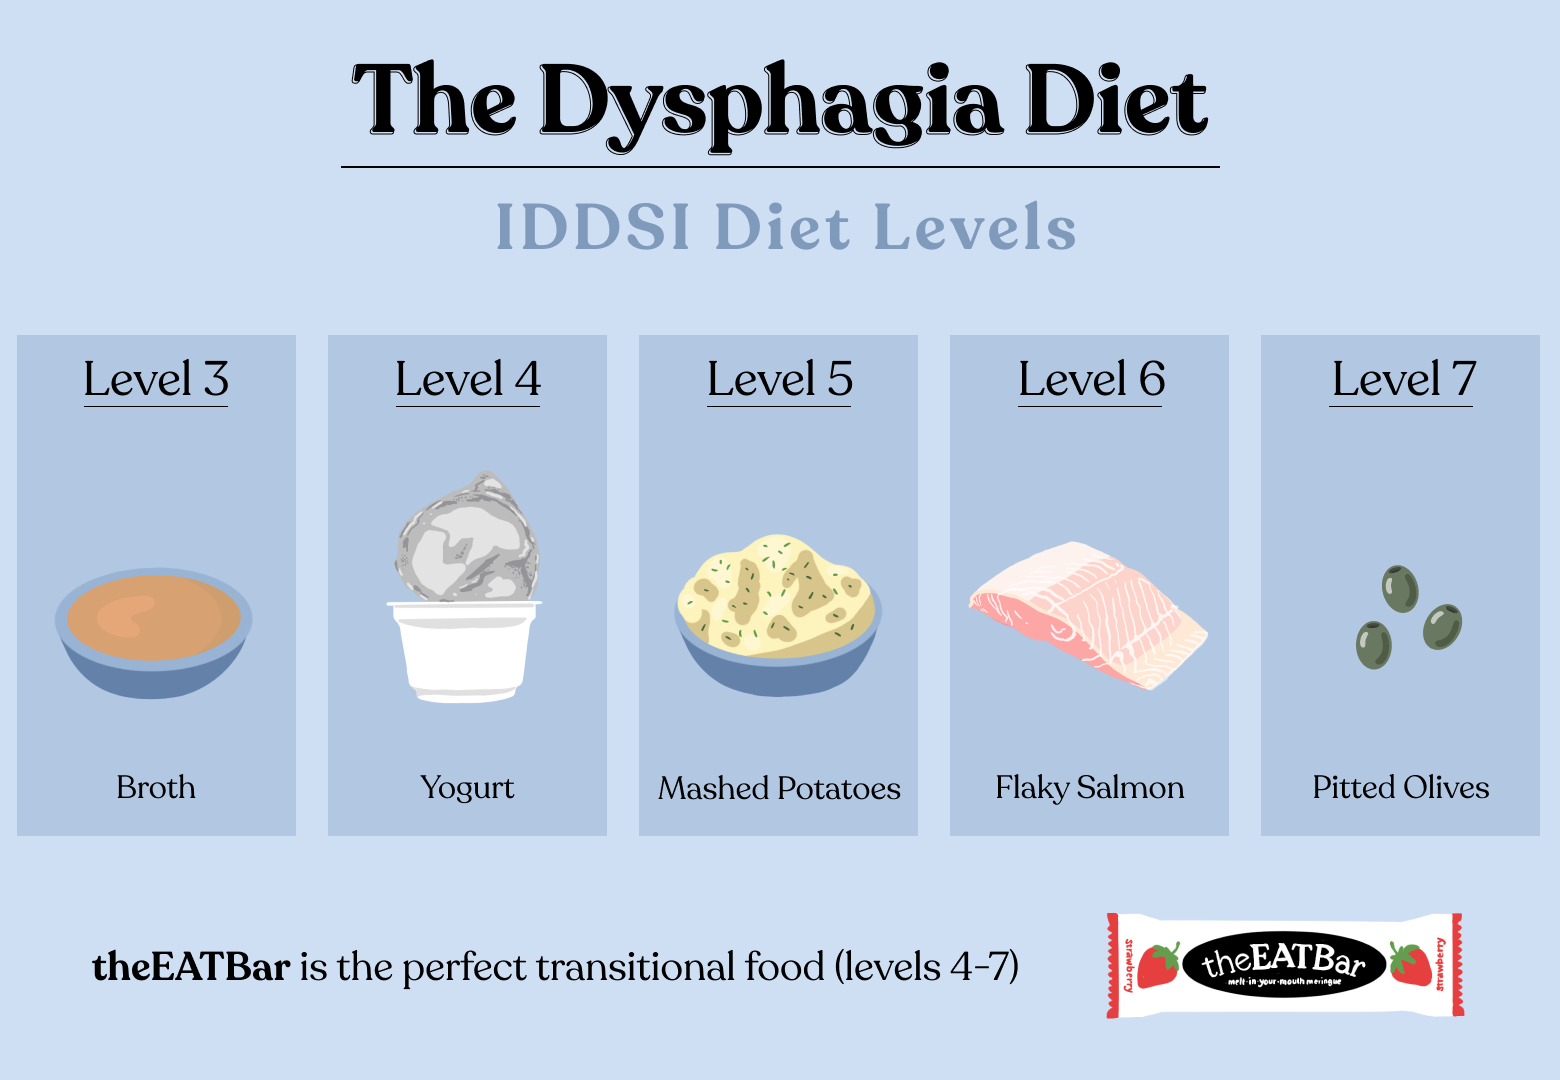 Breaking down the levels of the Dysphagia Diet